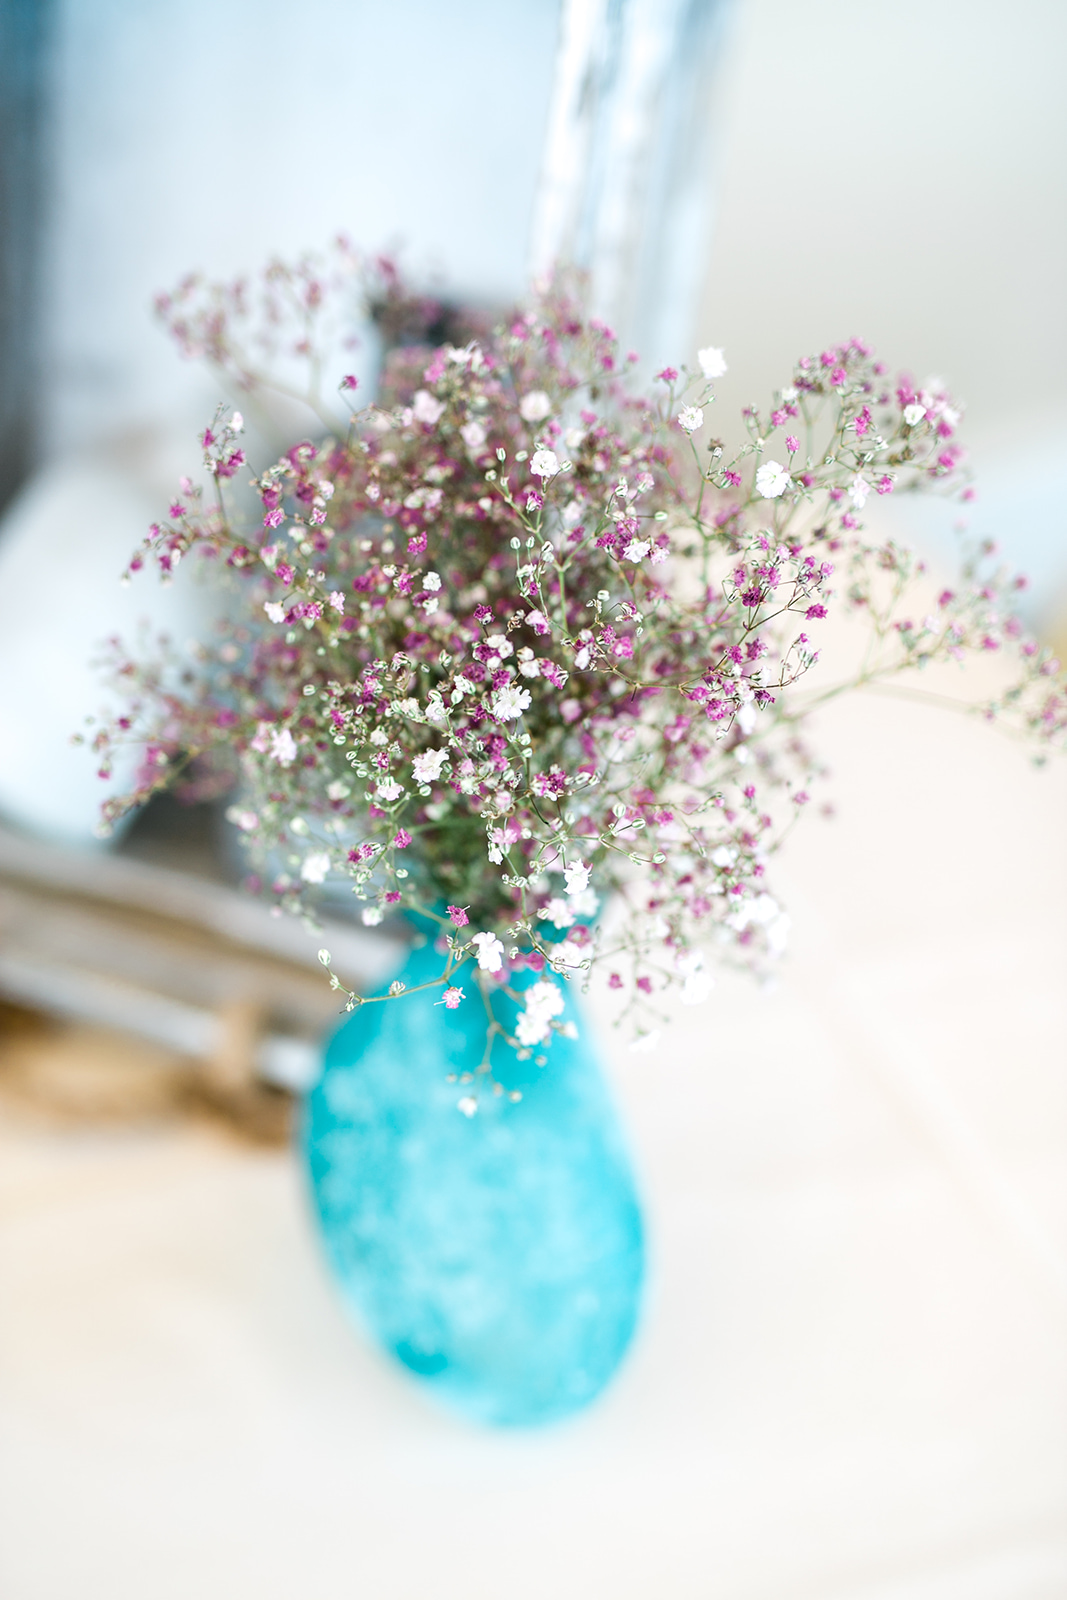 Blue vases with purple flowers - Pearl Weddings & Events